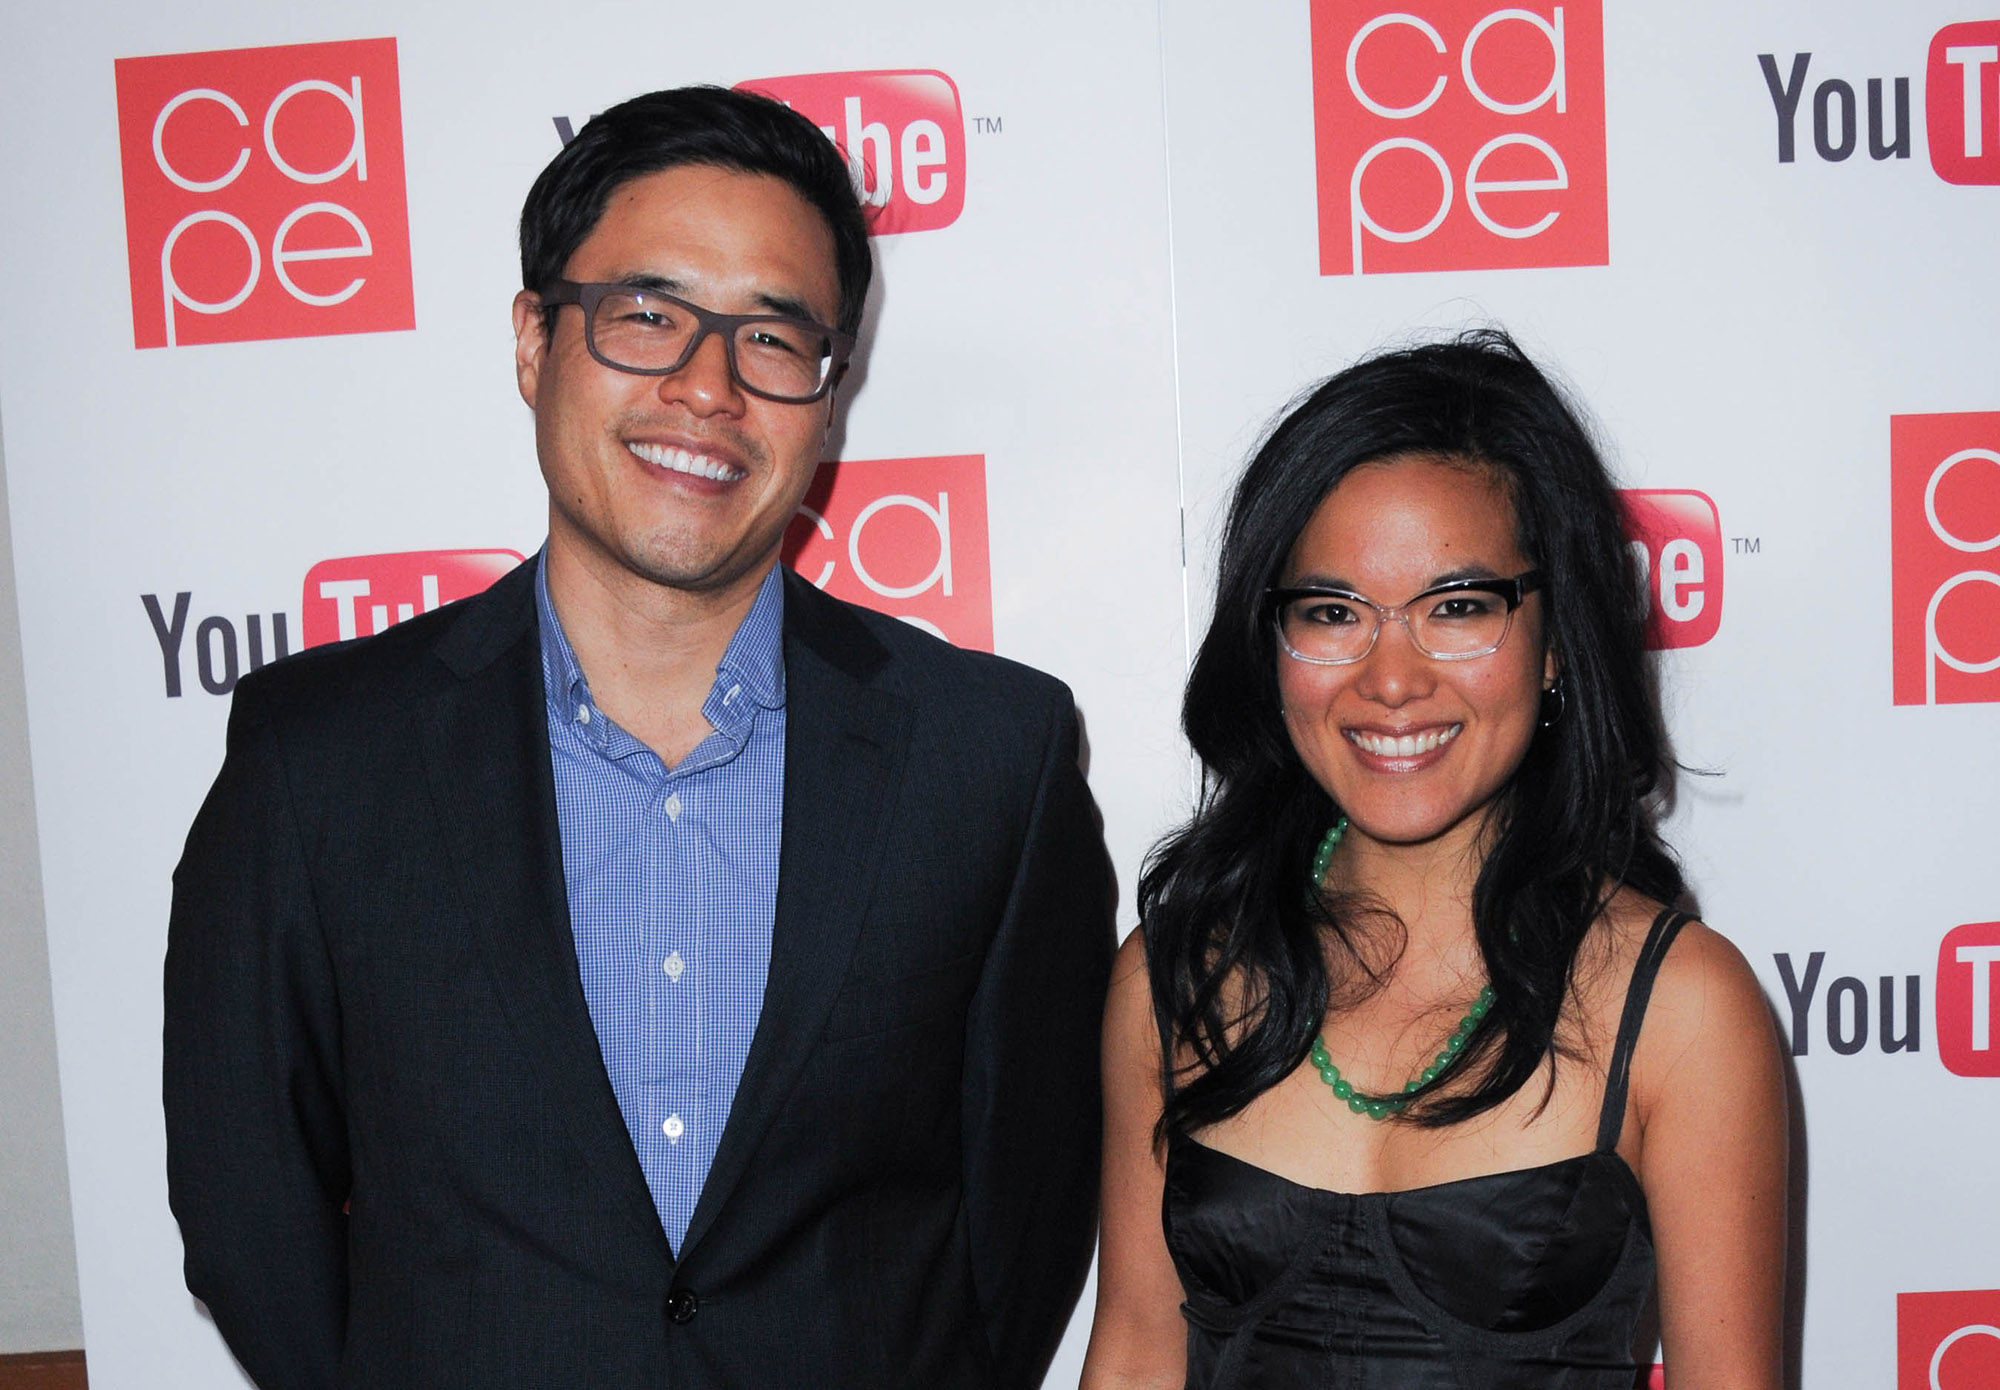 Randall Park and actress Ali Wong arrive for CAPE's 20th Anniversary Gala held at Union Station on November 12, 2011 in Los Angeles, California.  (Photo by Albert L. Ortega/Getty Images) (Albert L. Ortega&mdash;Getty Images)